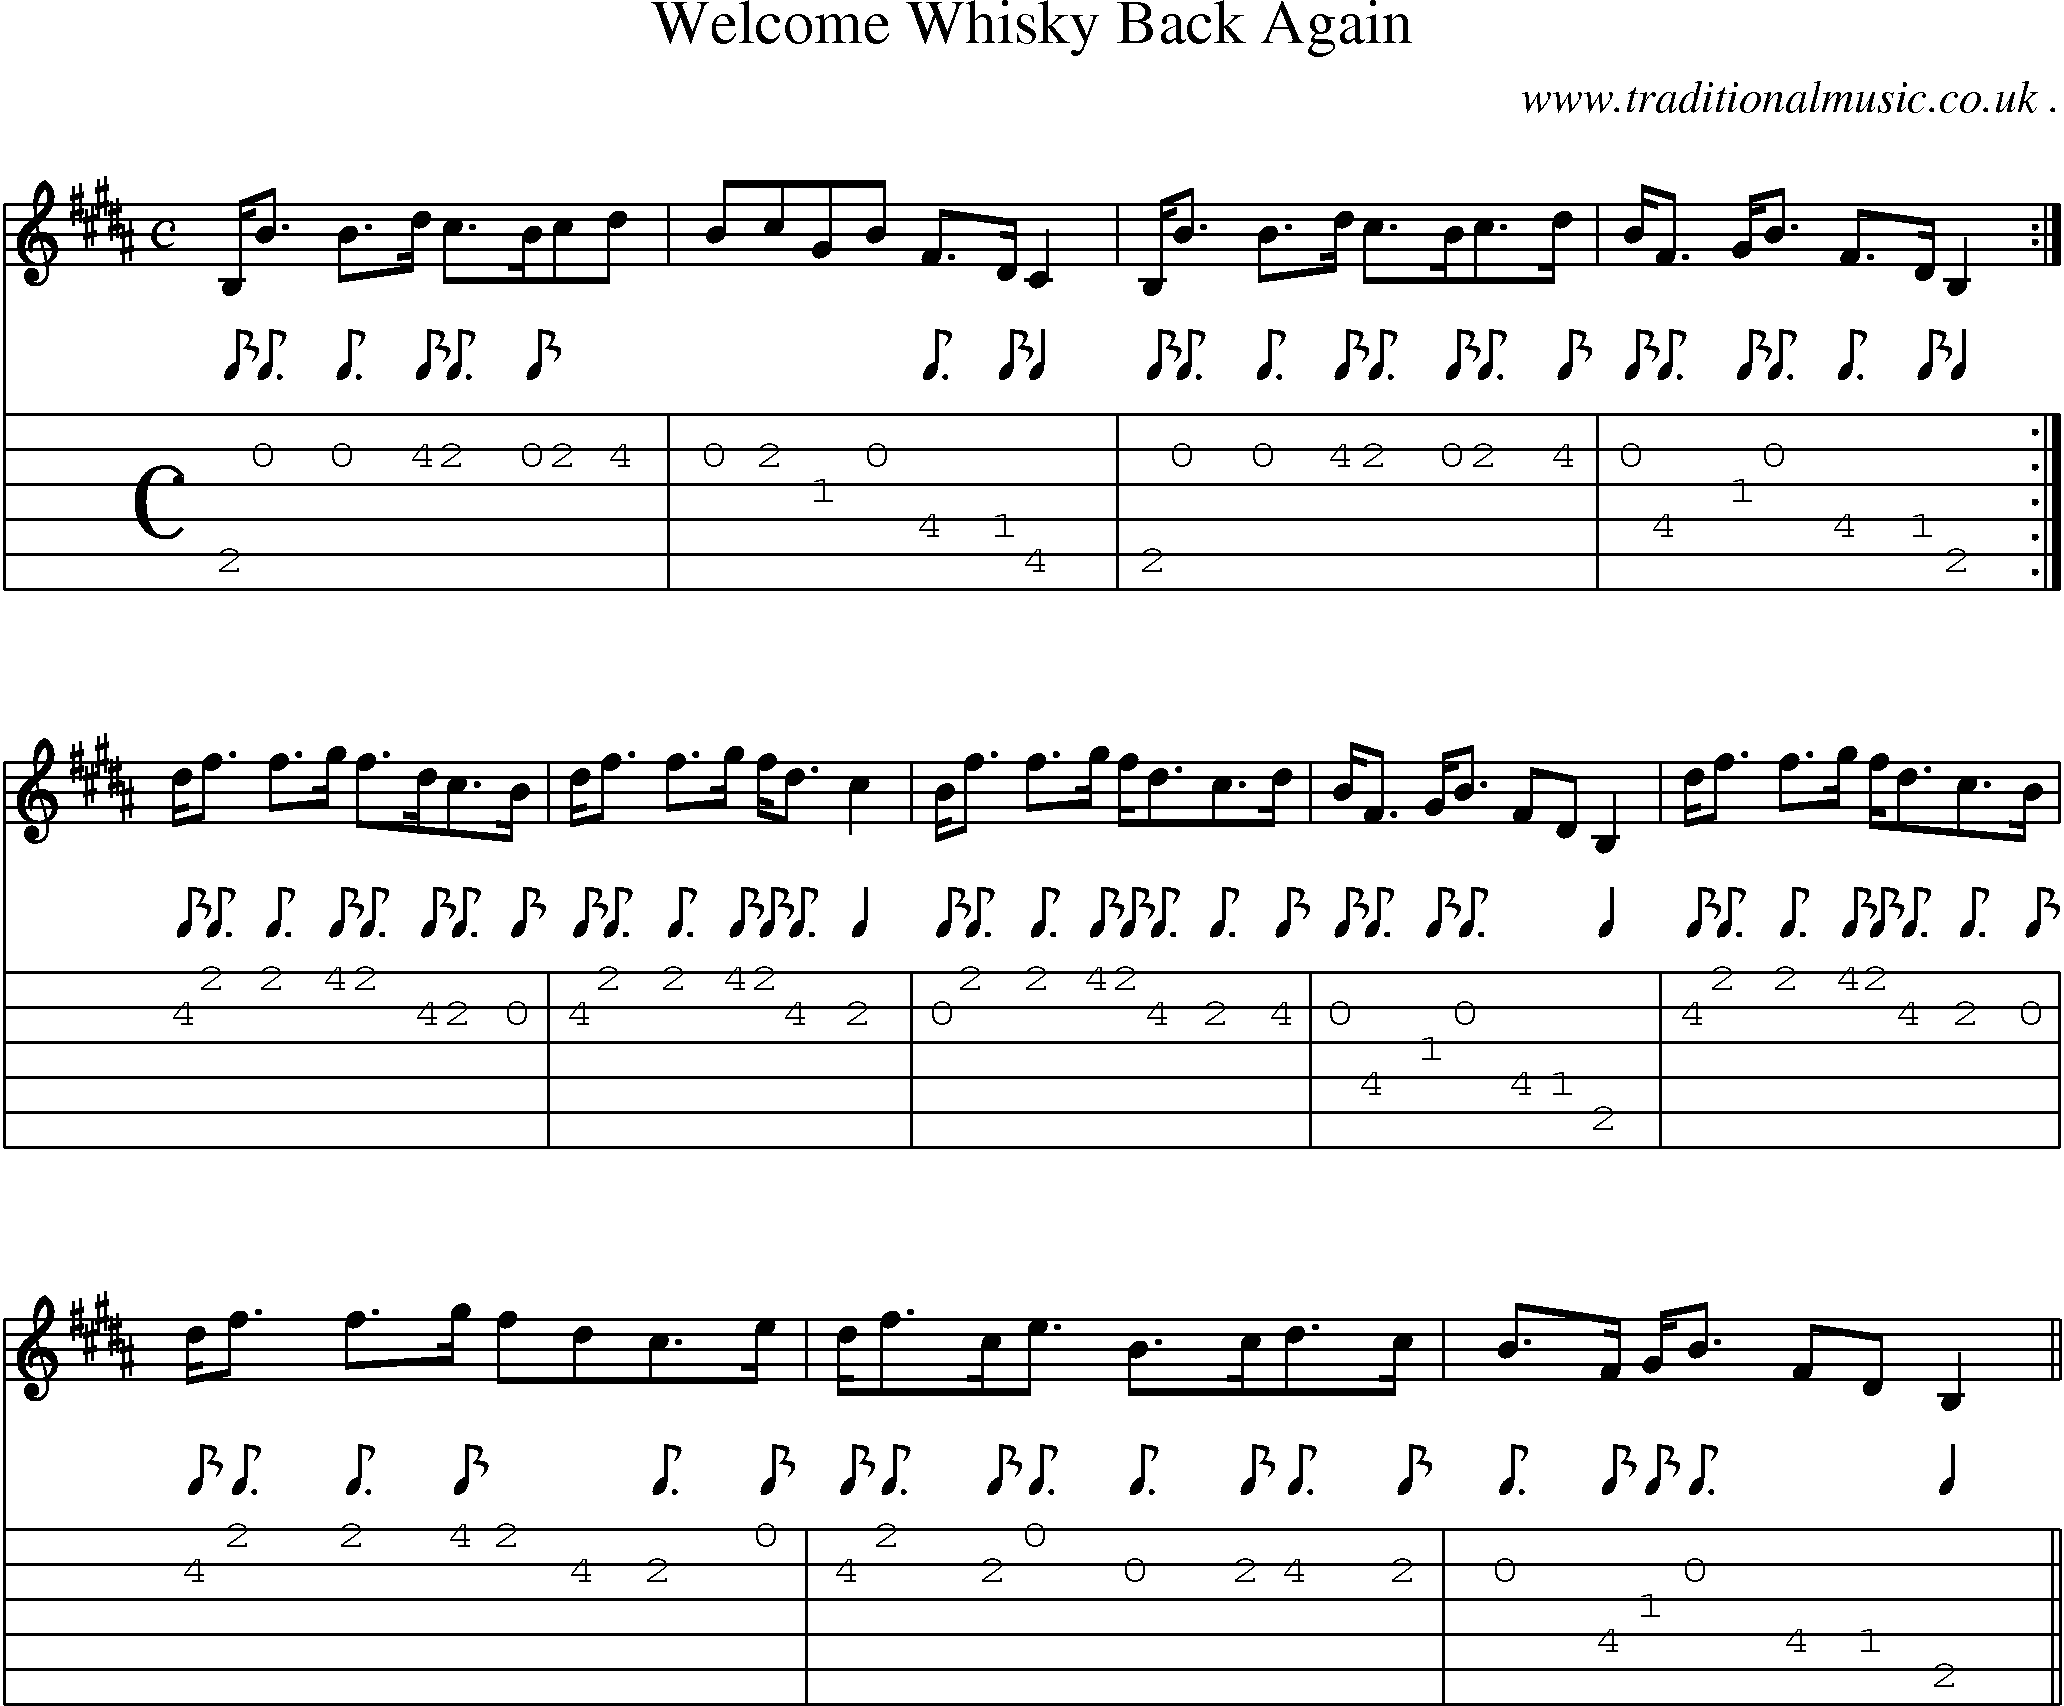 Sheet-music  score, Chords and Guitar Tabs for Welcome Whisky Back Again